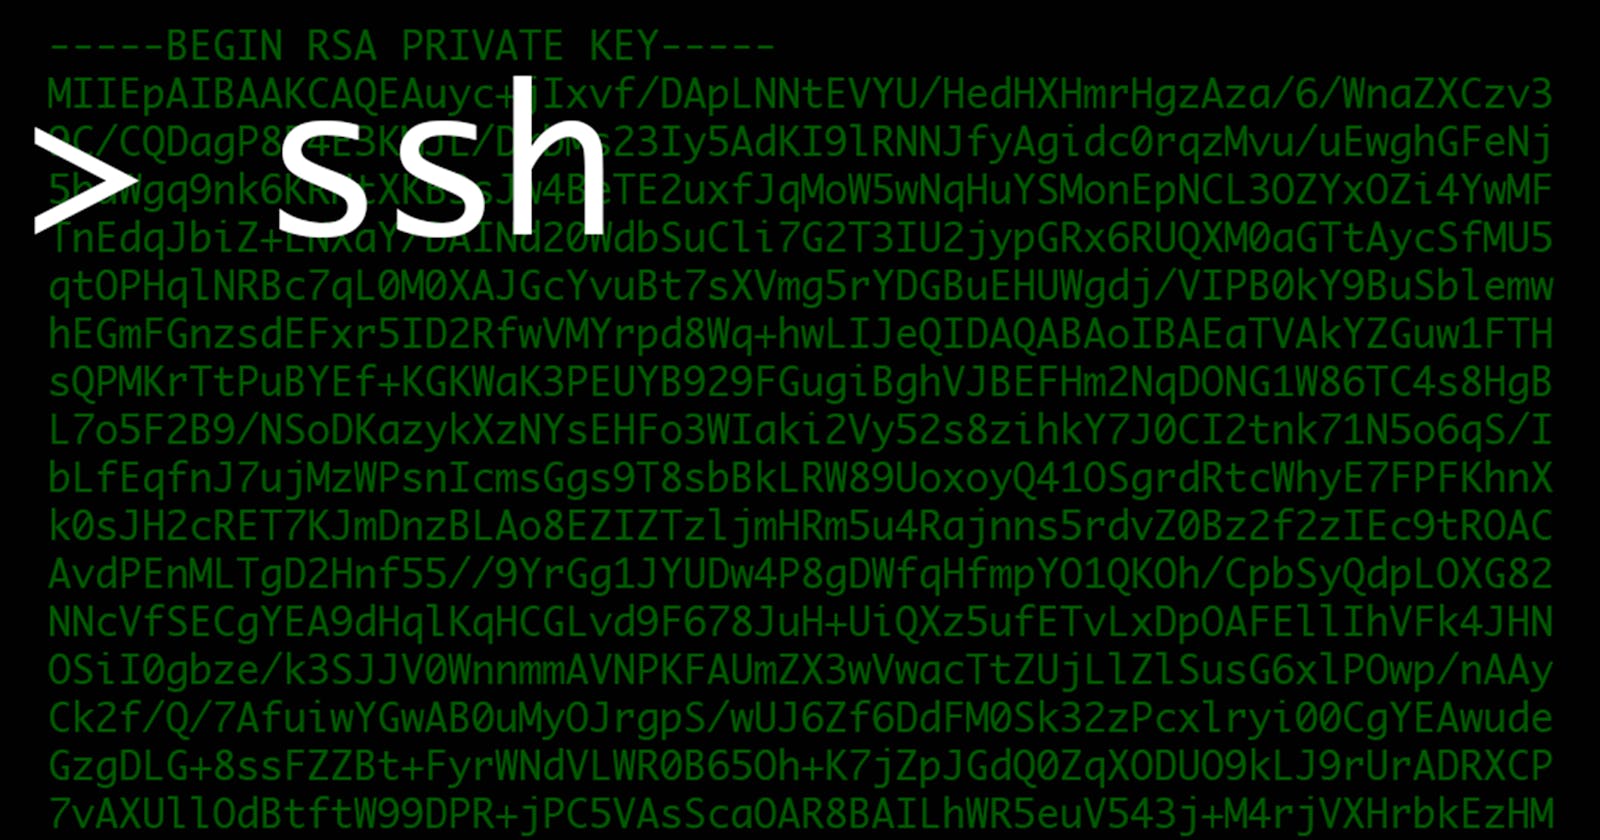 How to connect remote shell through SSH in Linux over internet?